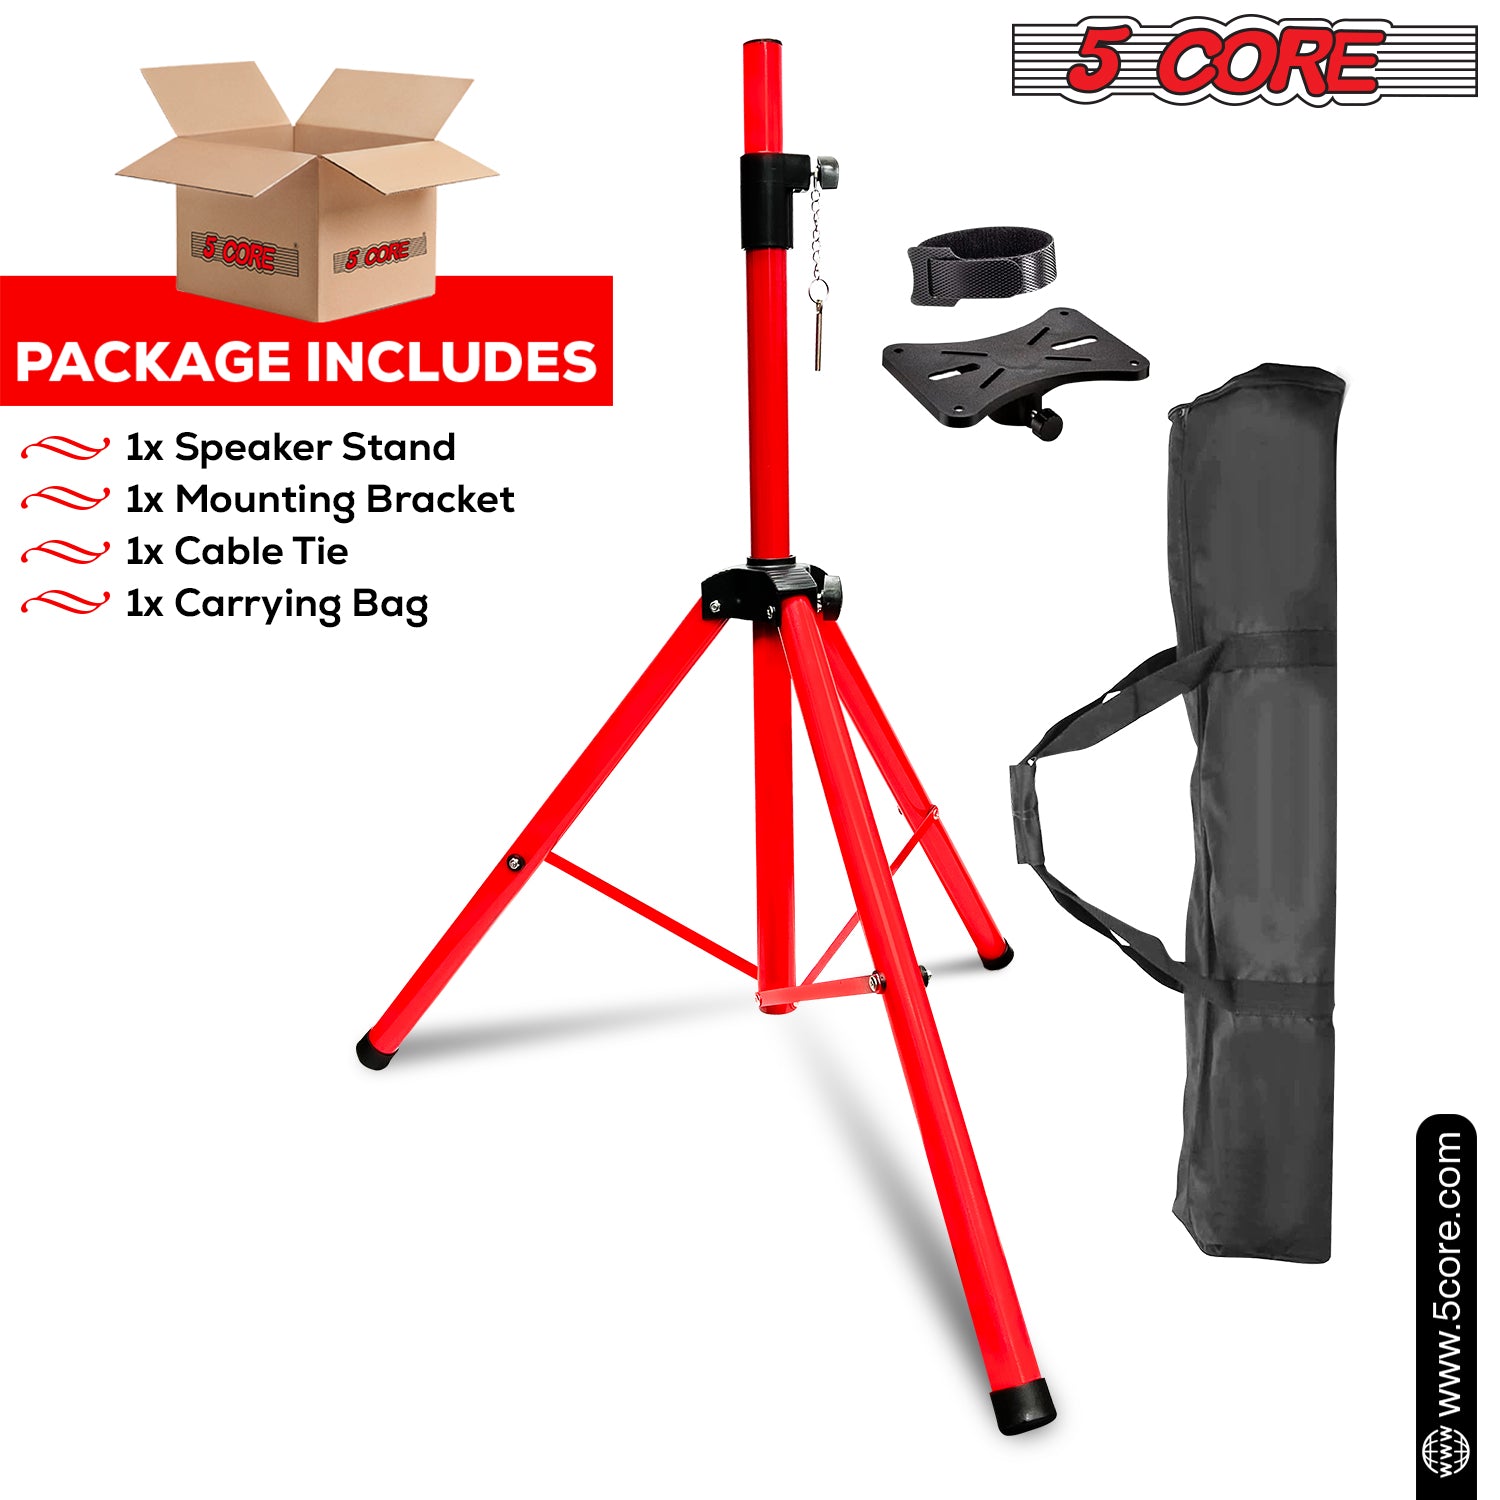 Package includes stand, cable ties, bracket, carry bag